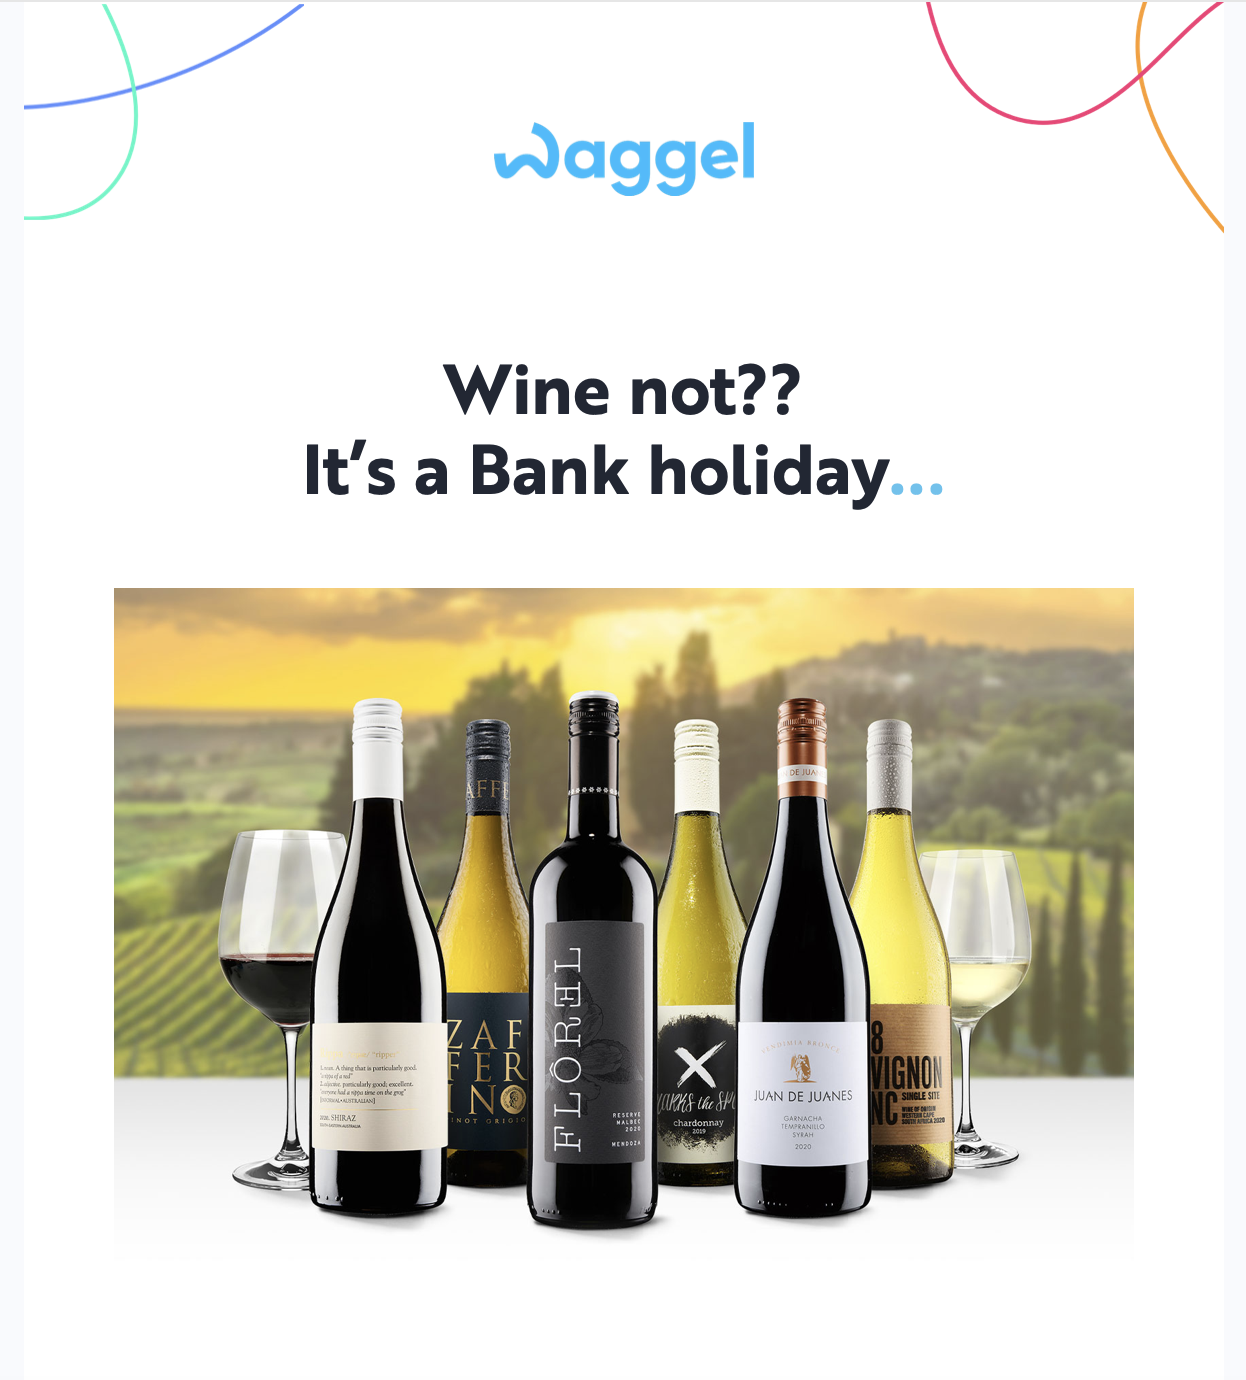 Waggel email marketing example